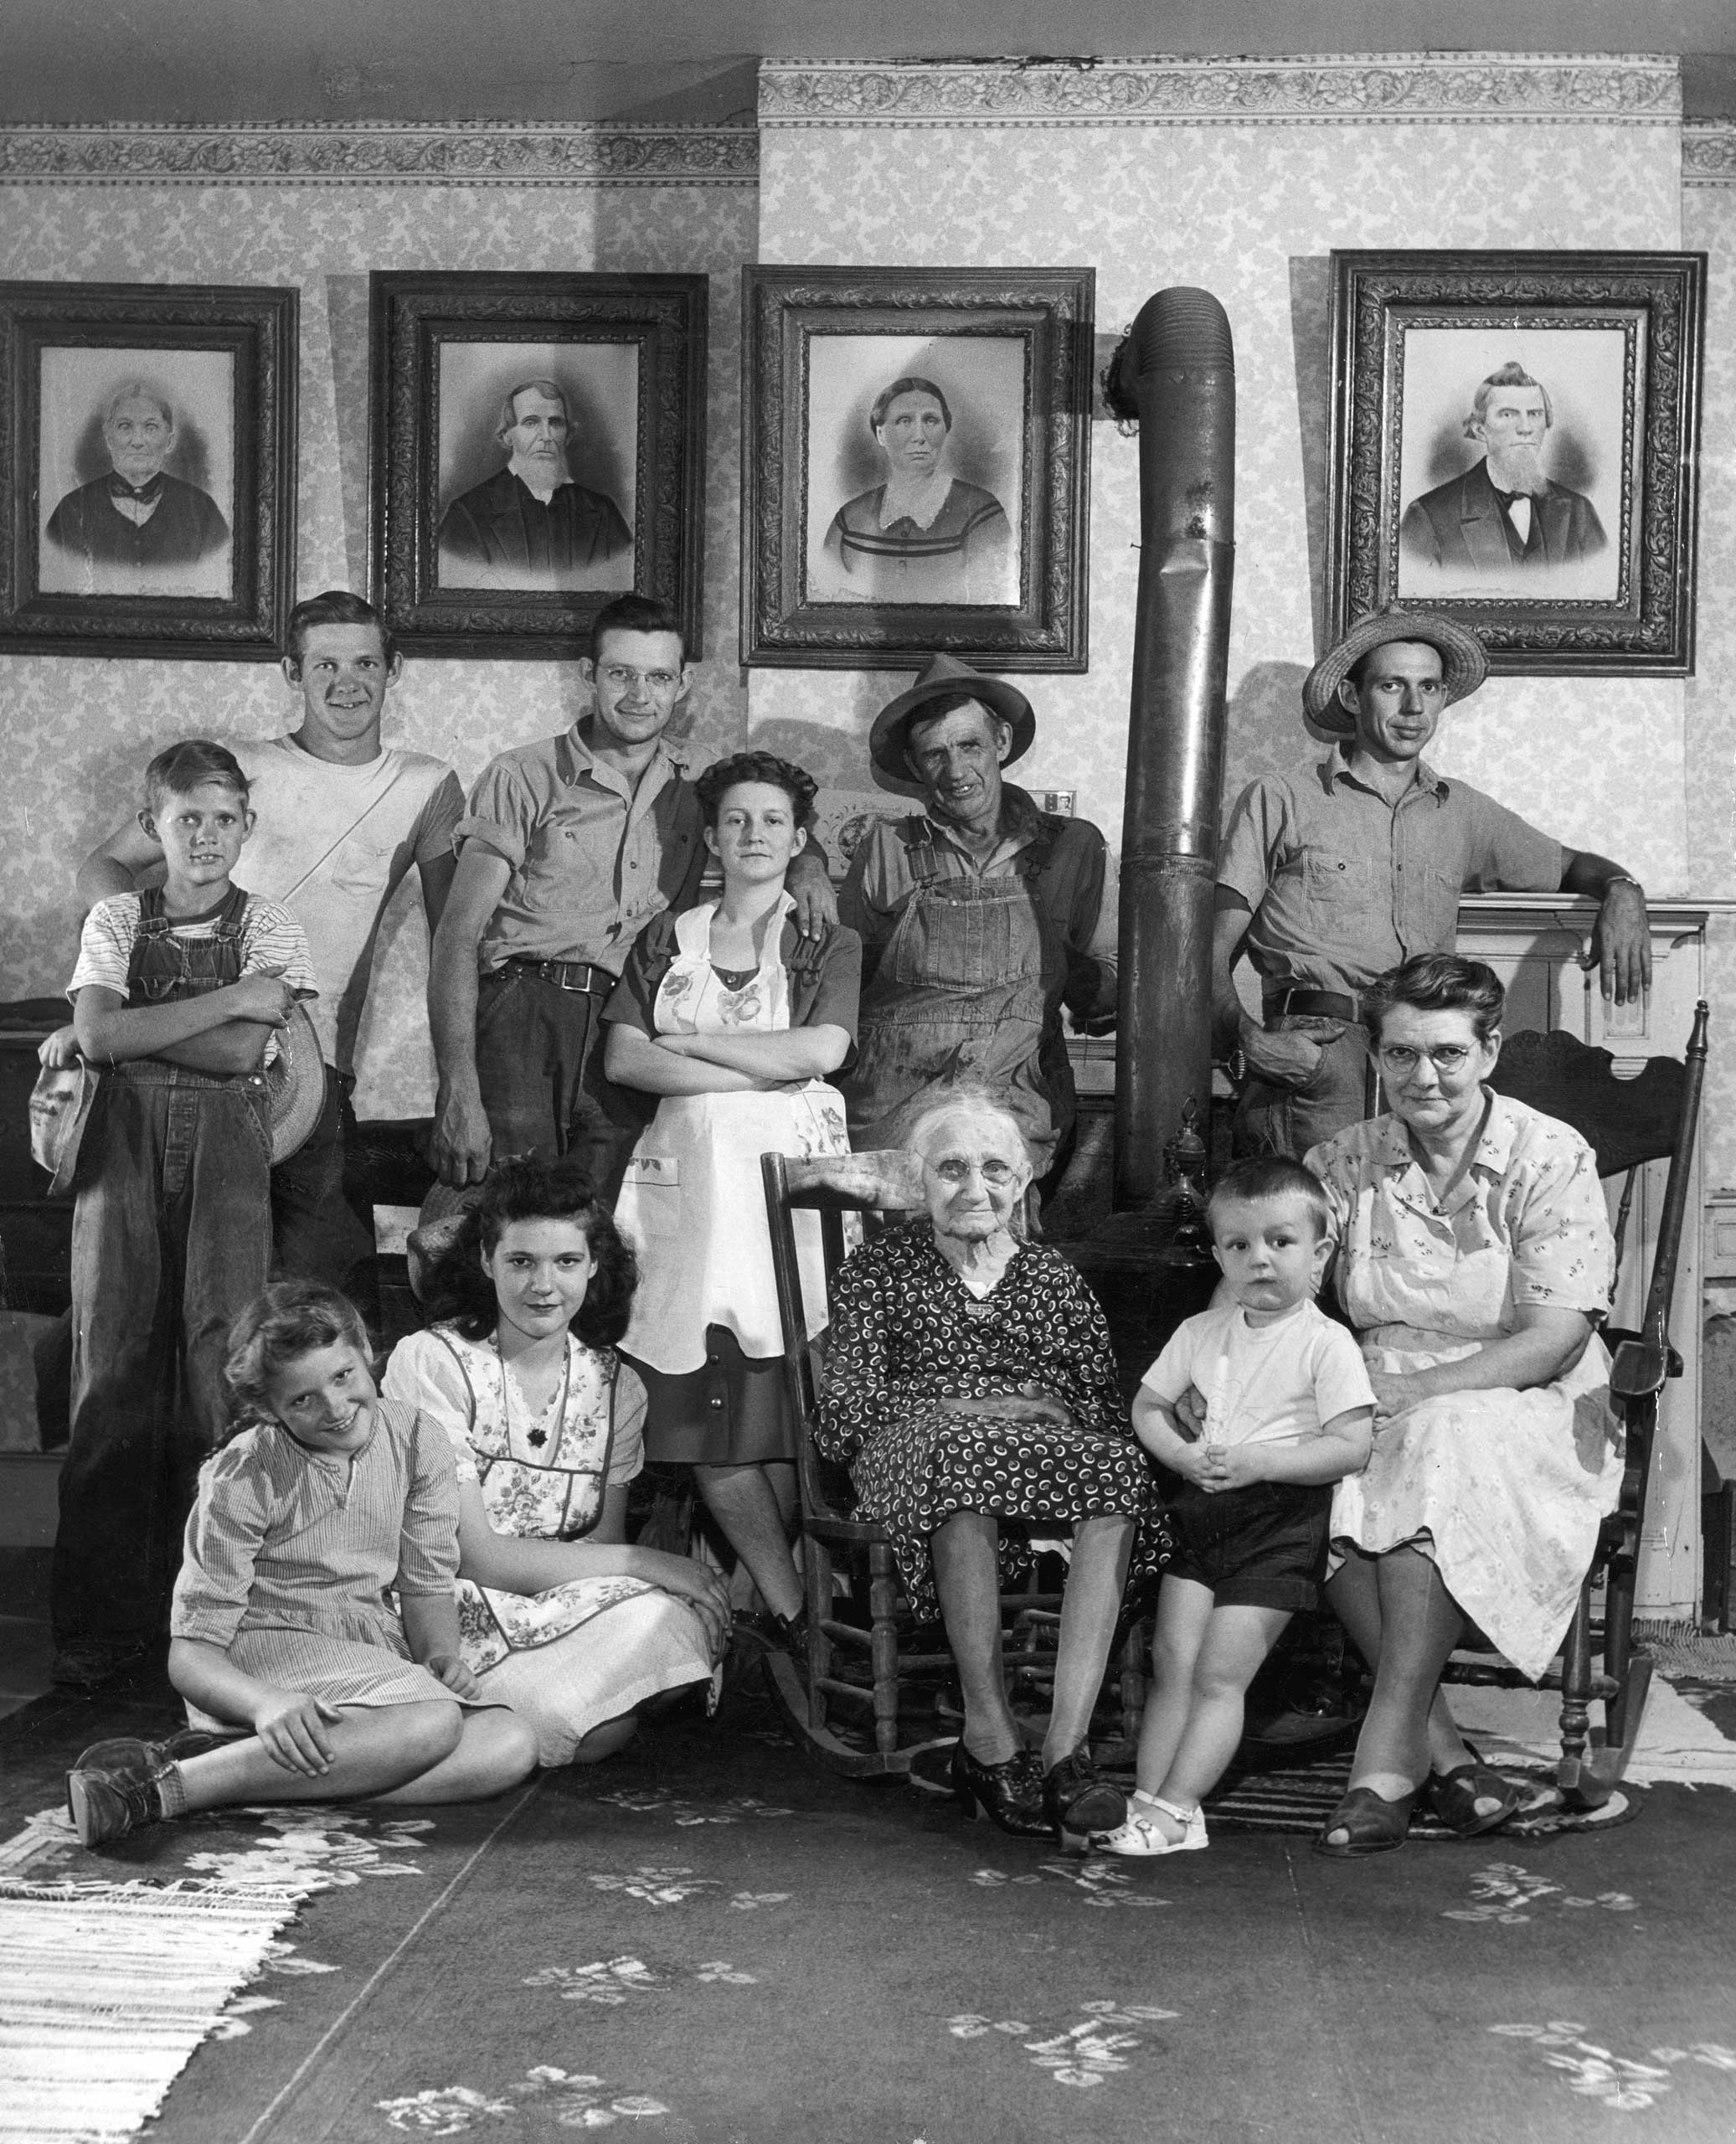 Caption that accompanied this picture in the July 26, 1948, issue of LIFE: "Four generations of the Russells gather for a portrait. The grandmother is 90, but she is still active. The portraits on wall at left are of old Mrs. Russell's parents, at right those at her late husband."